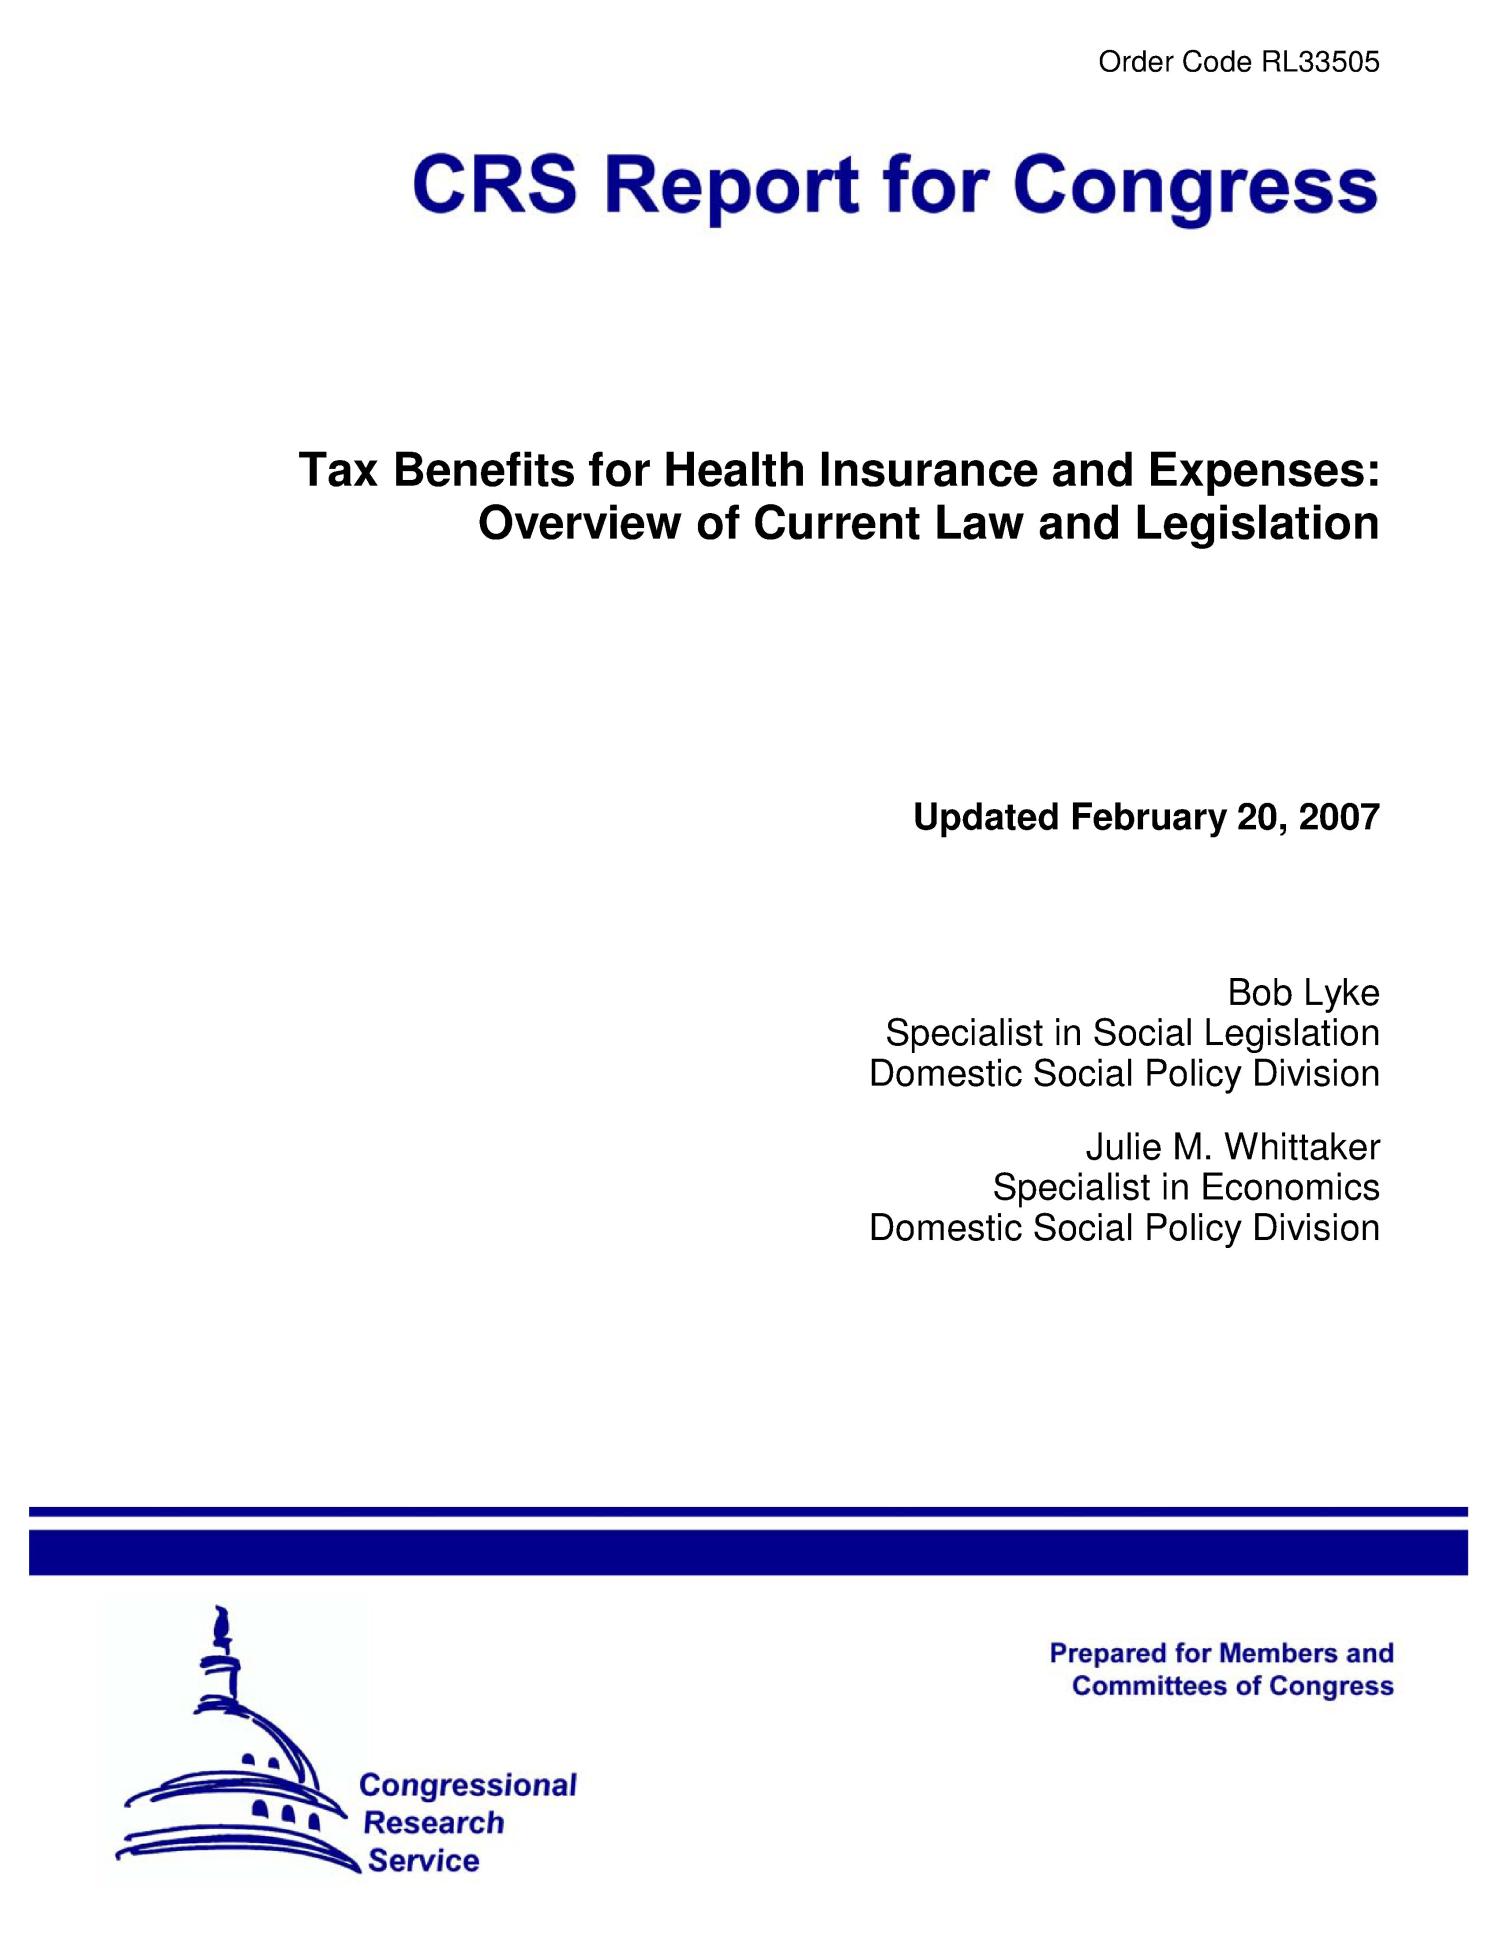 Tax Benefits for Health Insurance and Expenses: Overview of Current Law and Legislation
                                                
                                                    [Sequence #]: 1 of 26
                                                